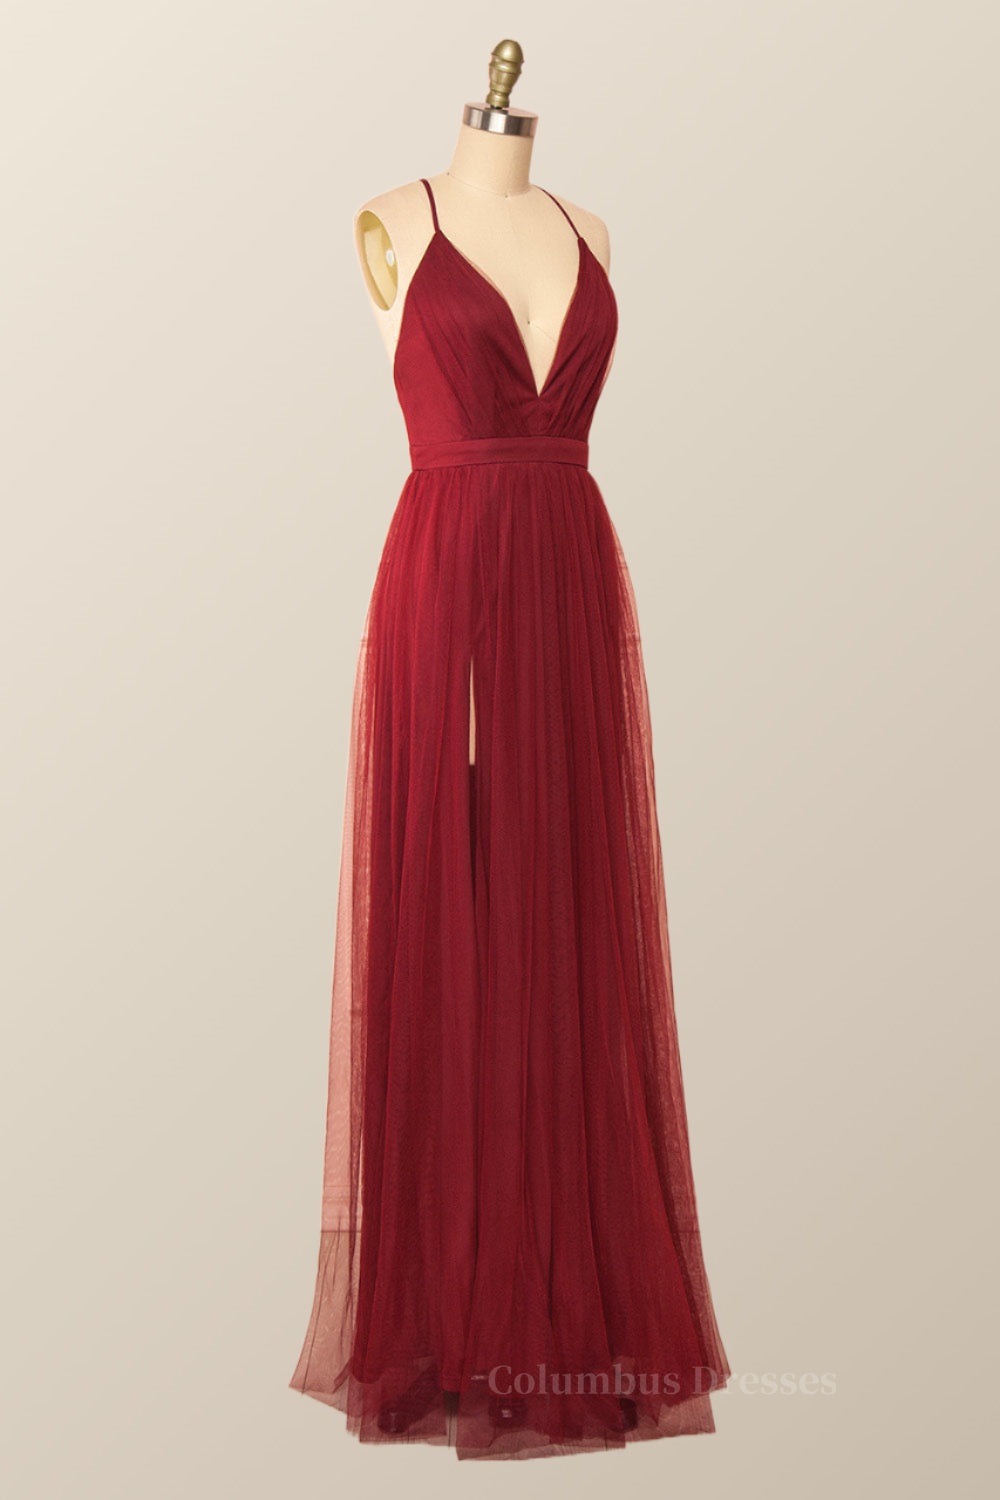 Bridesmaid Dresses Near Me, Wine Red Tulle A-line Long Maxi Dress